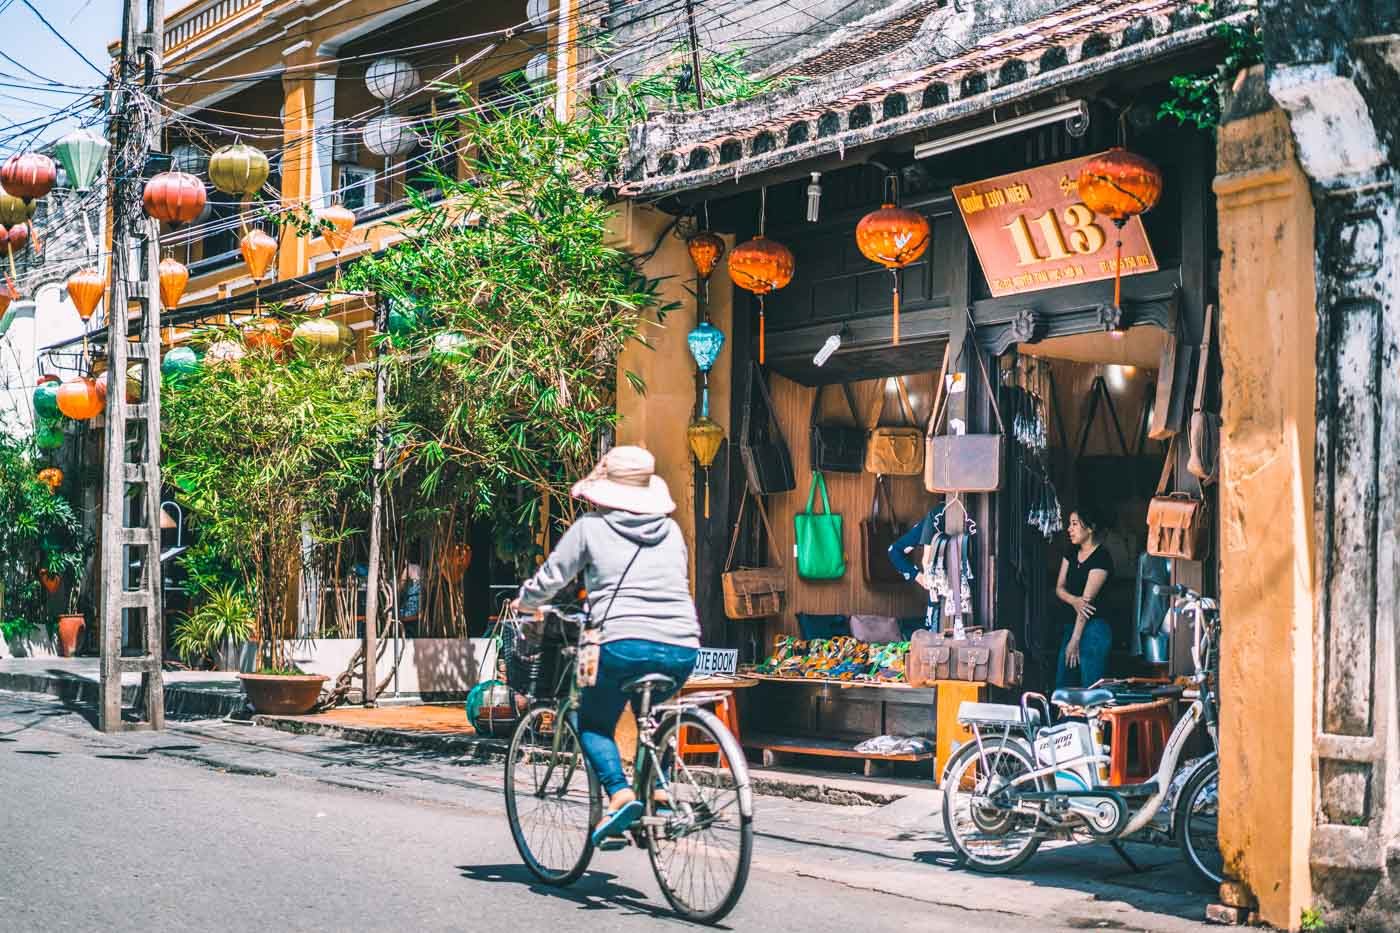 Things to do in Vietnam include cycling tours